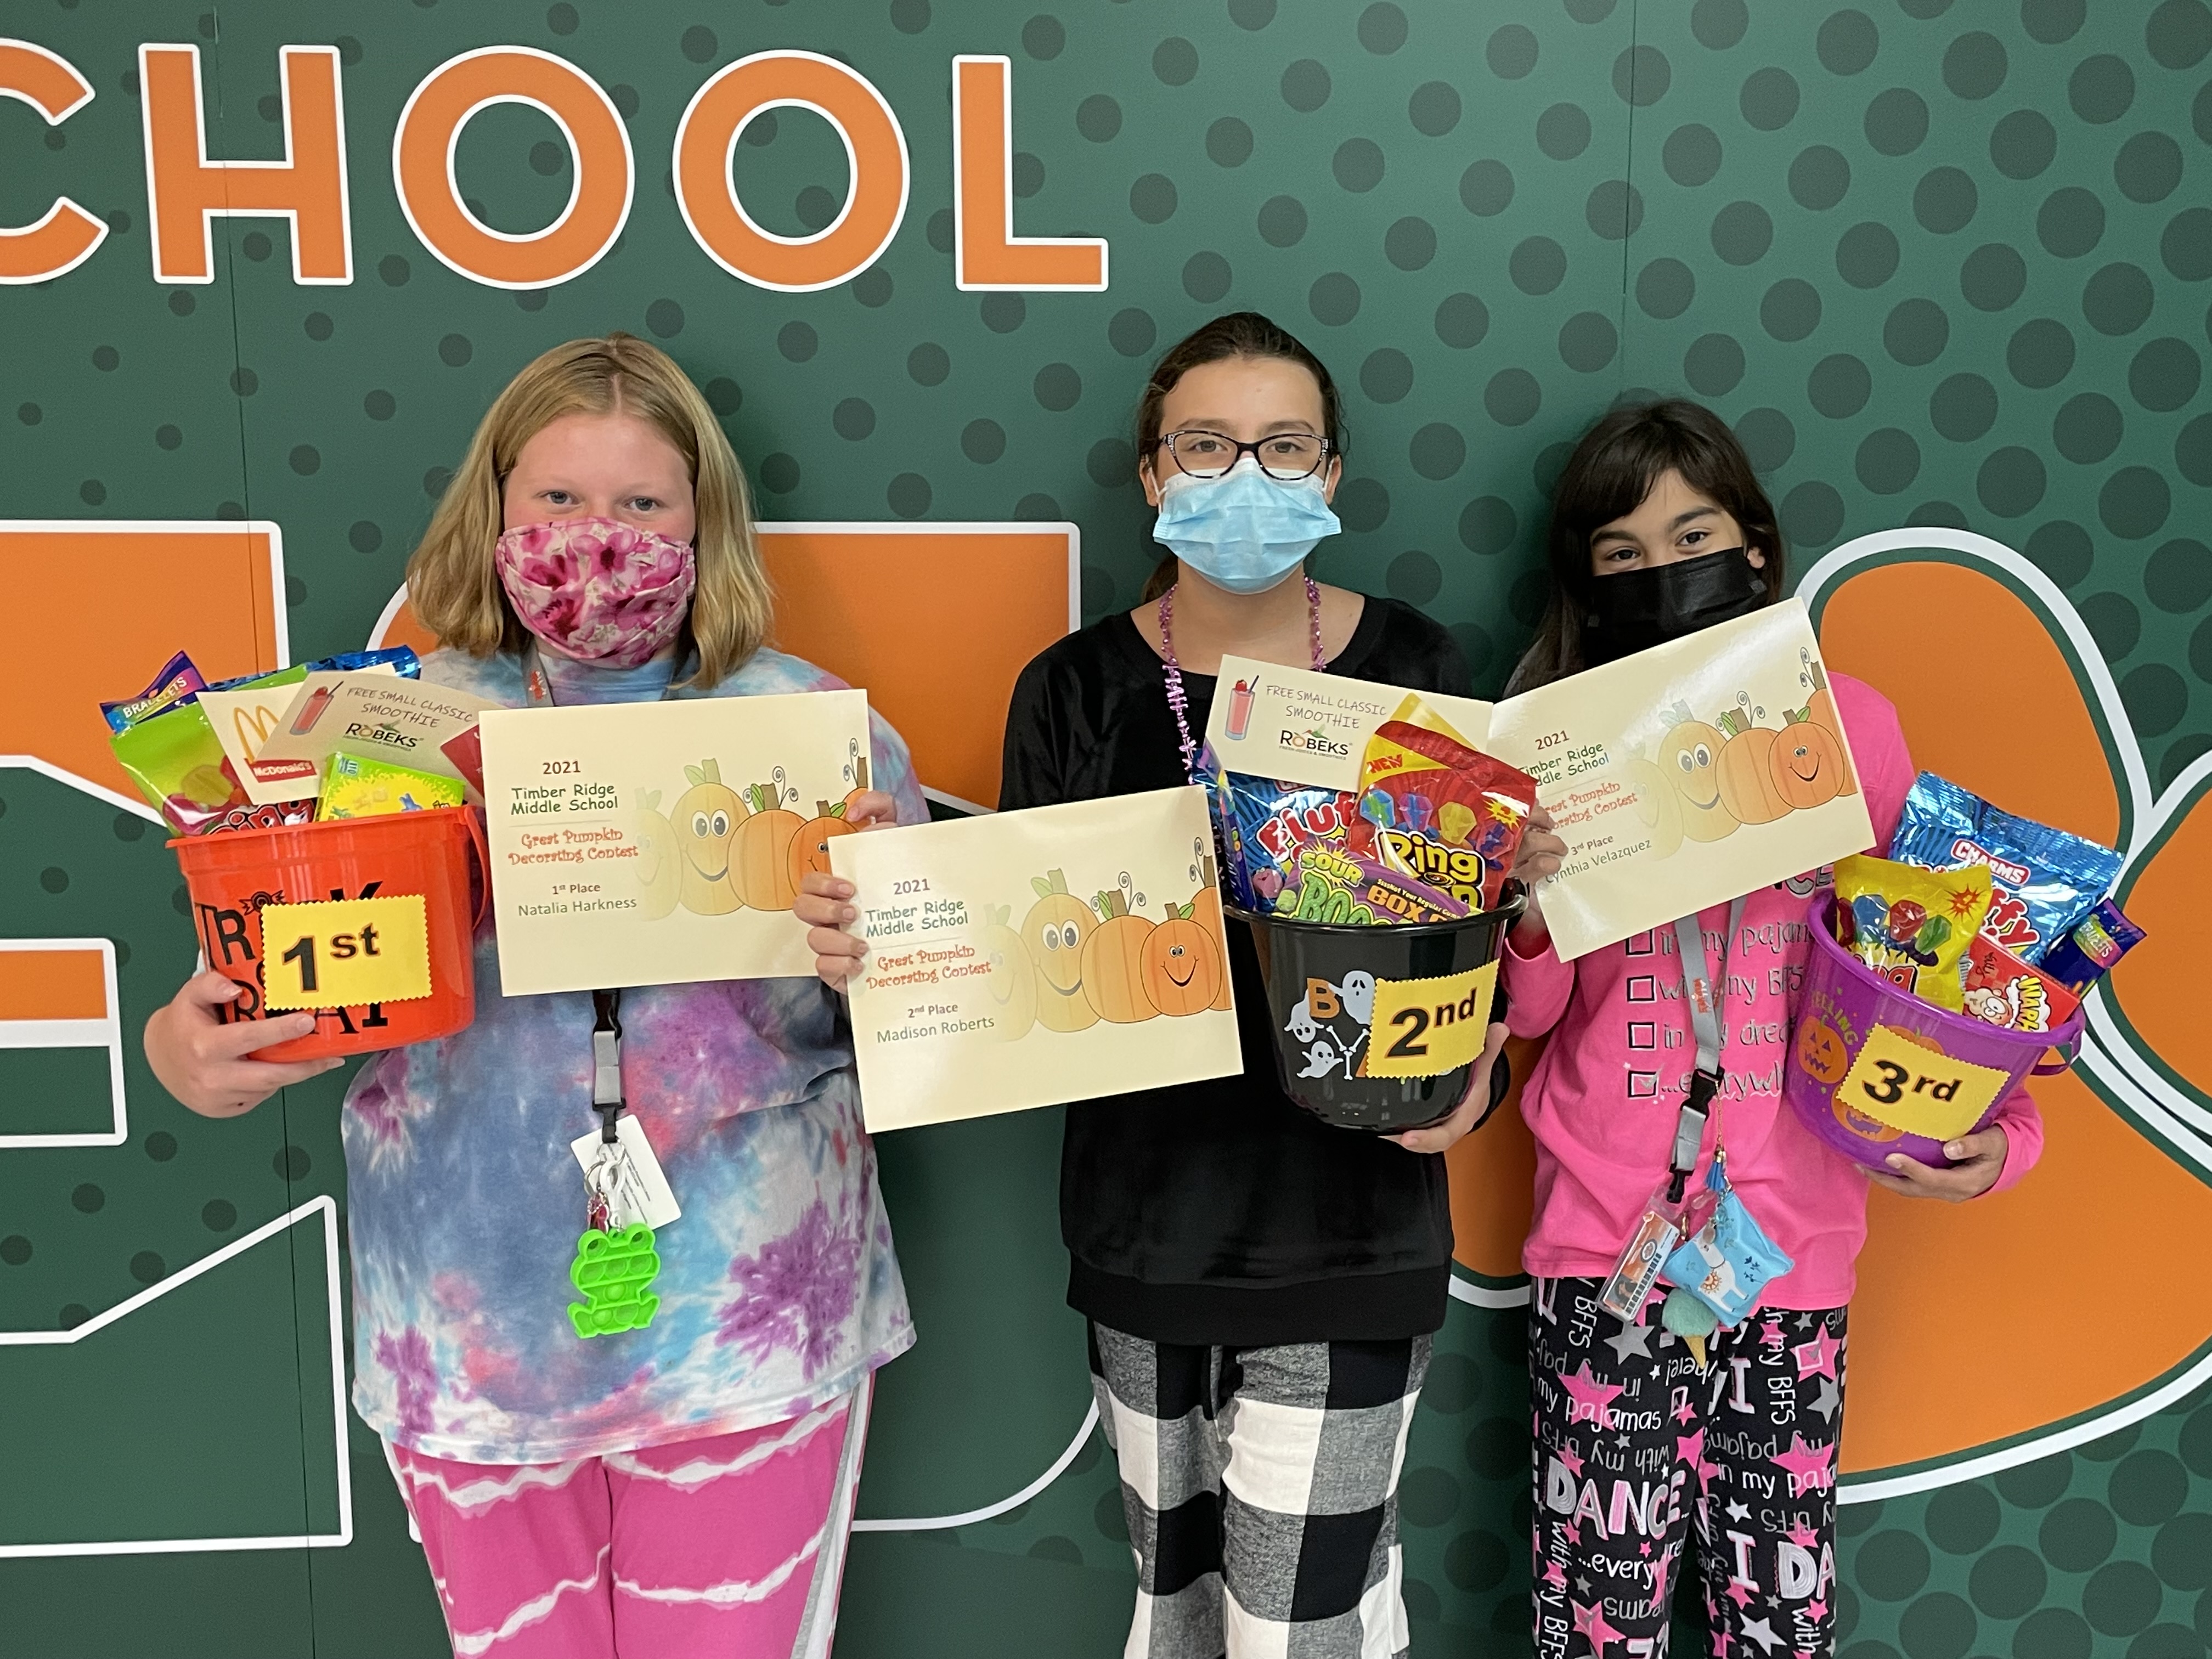 Congratulations to the 2021 Great Pumpkin Decorating Contest Winners!